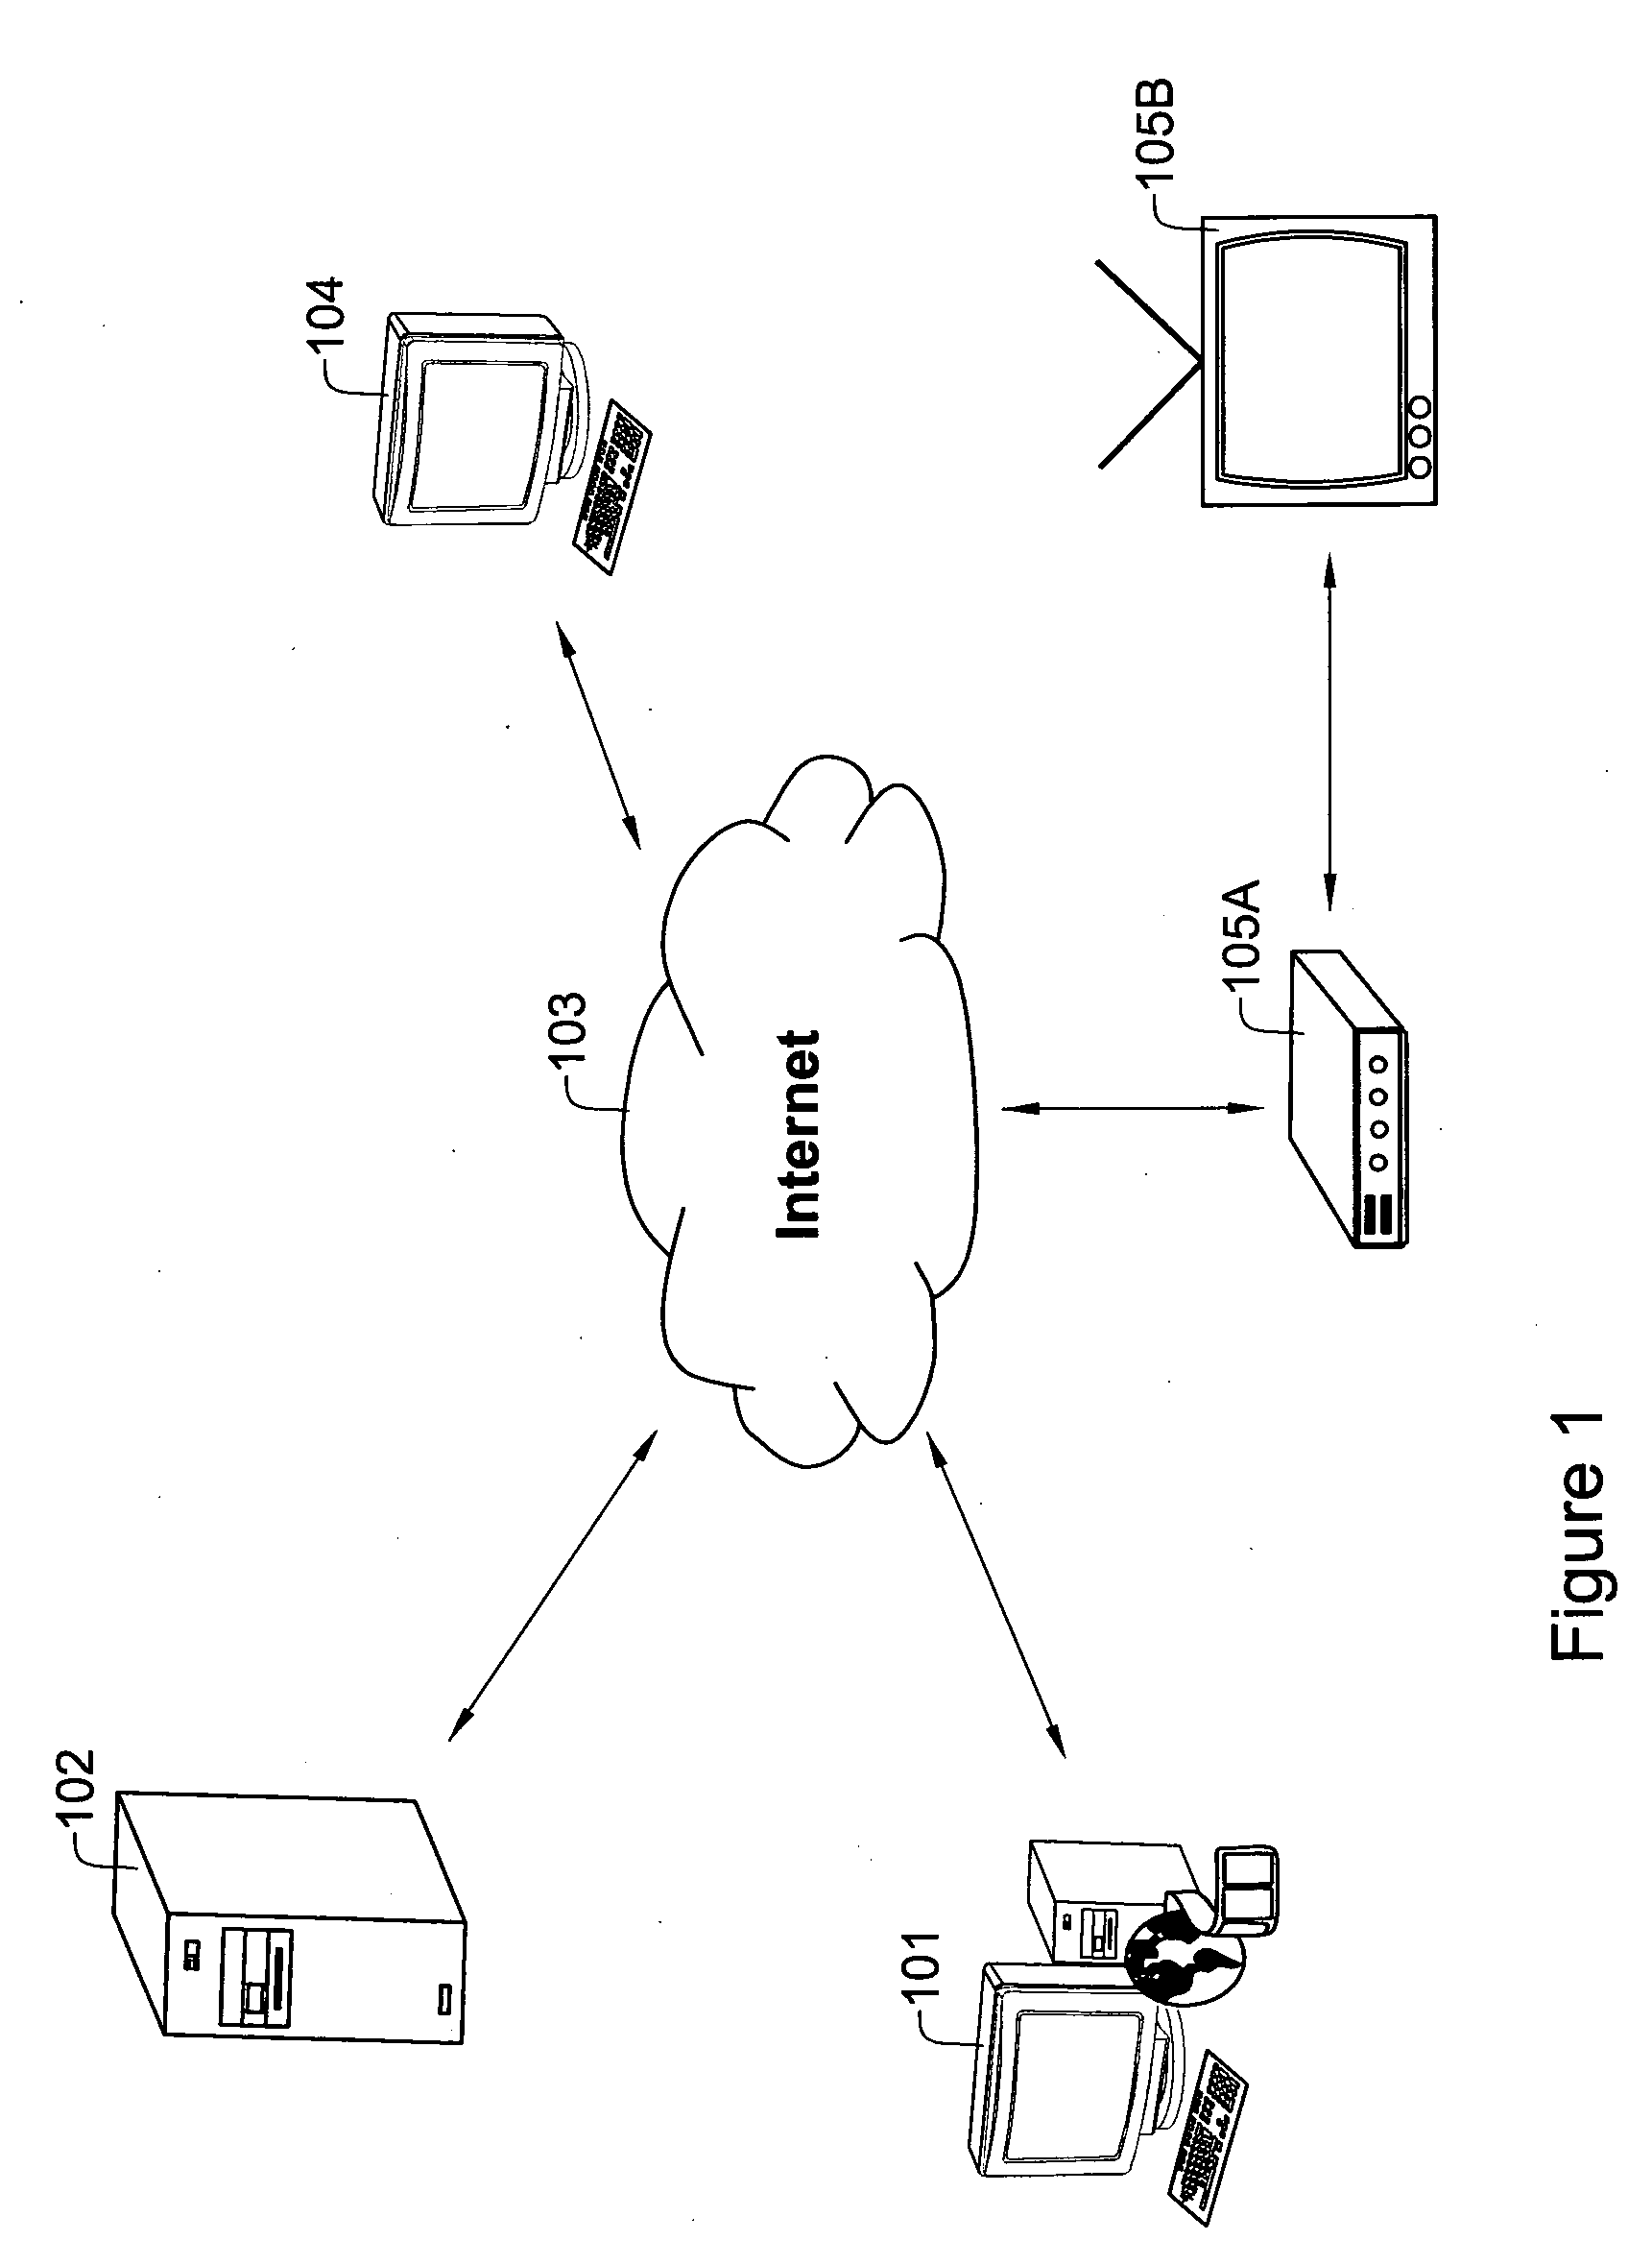 System and methods for peer-to-peer media streaming